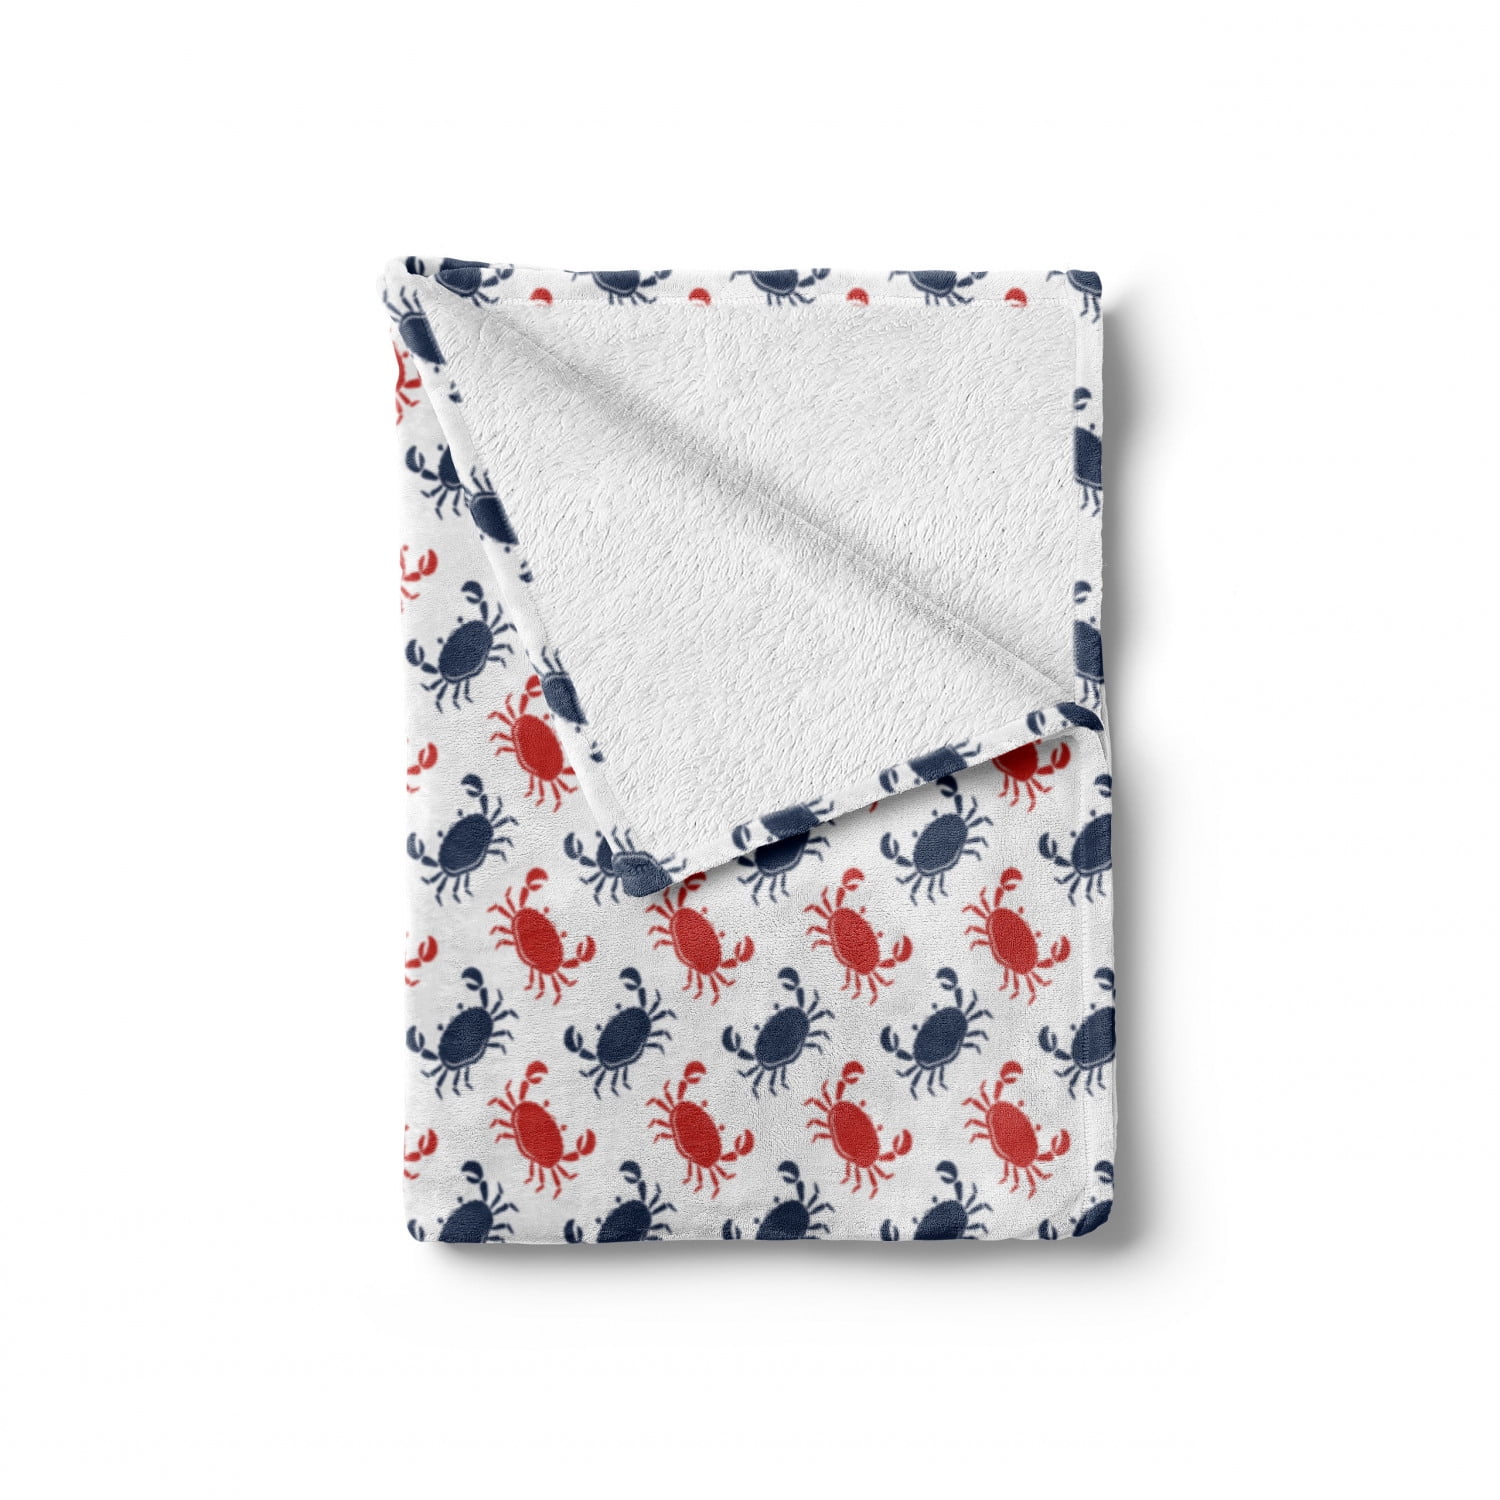 Ambesonne Crabs Soft Flannel Fleece Throw Blanket Blue and Red 50 x 60 Cozy Plush for Indoor and Outdoor Use Sea Animals Theme Crabs on The White Background with Vintage Style Pattern Print